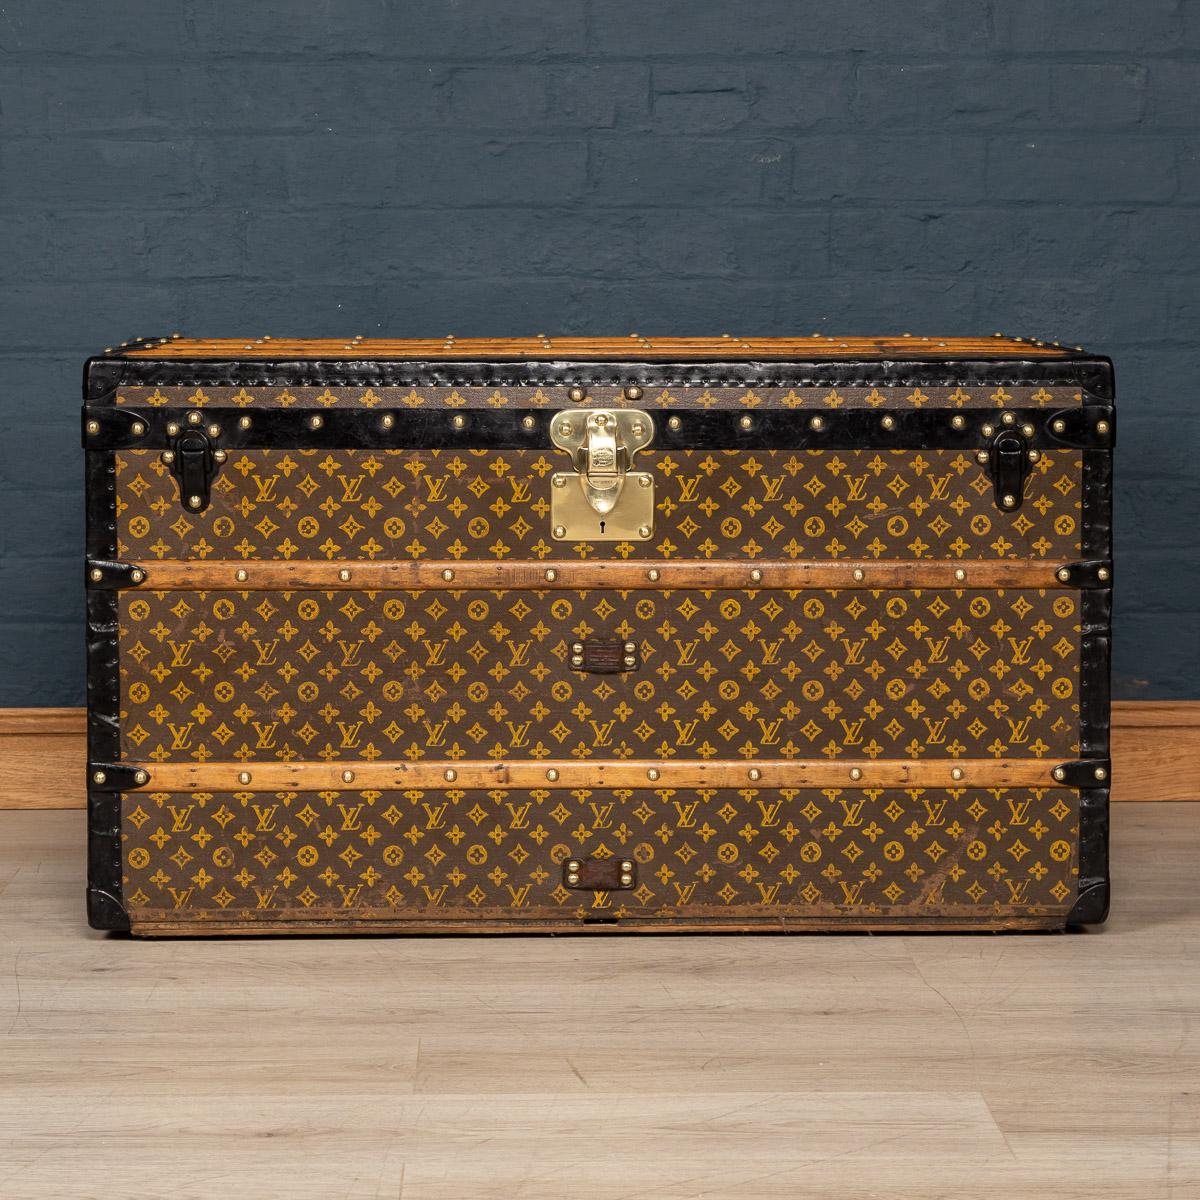 Antique 20th century Louis Vuitton trunk in the world famous monogrammed LV canvas. This trunk is in very condition and harks back to times of passenger ships and 1st class travel of bygone eras. A wonderful conversation piece that would make a